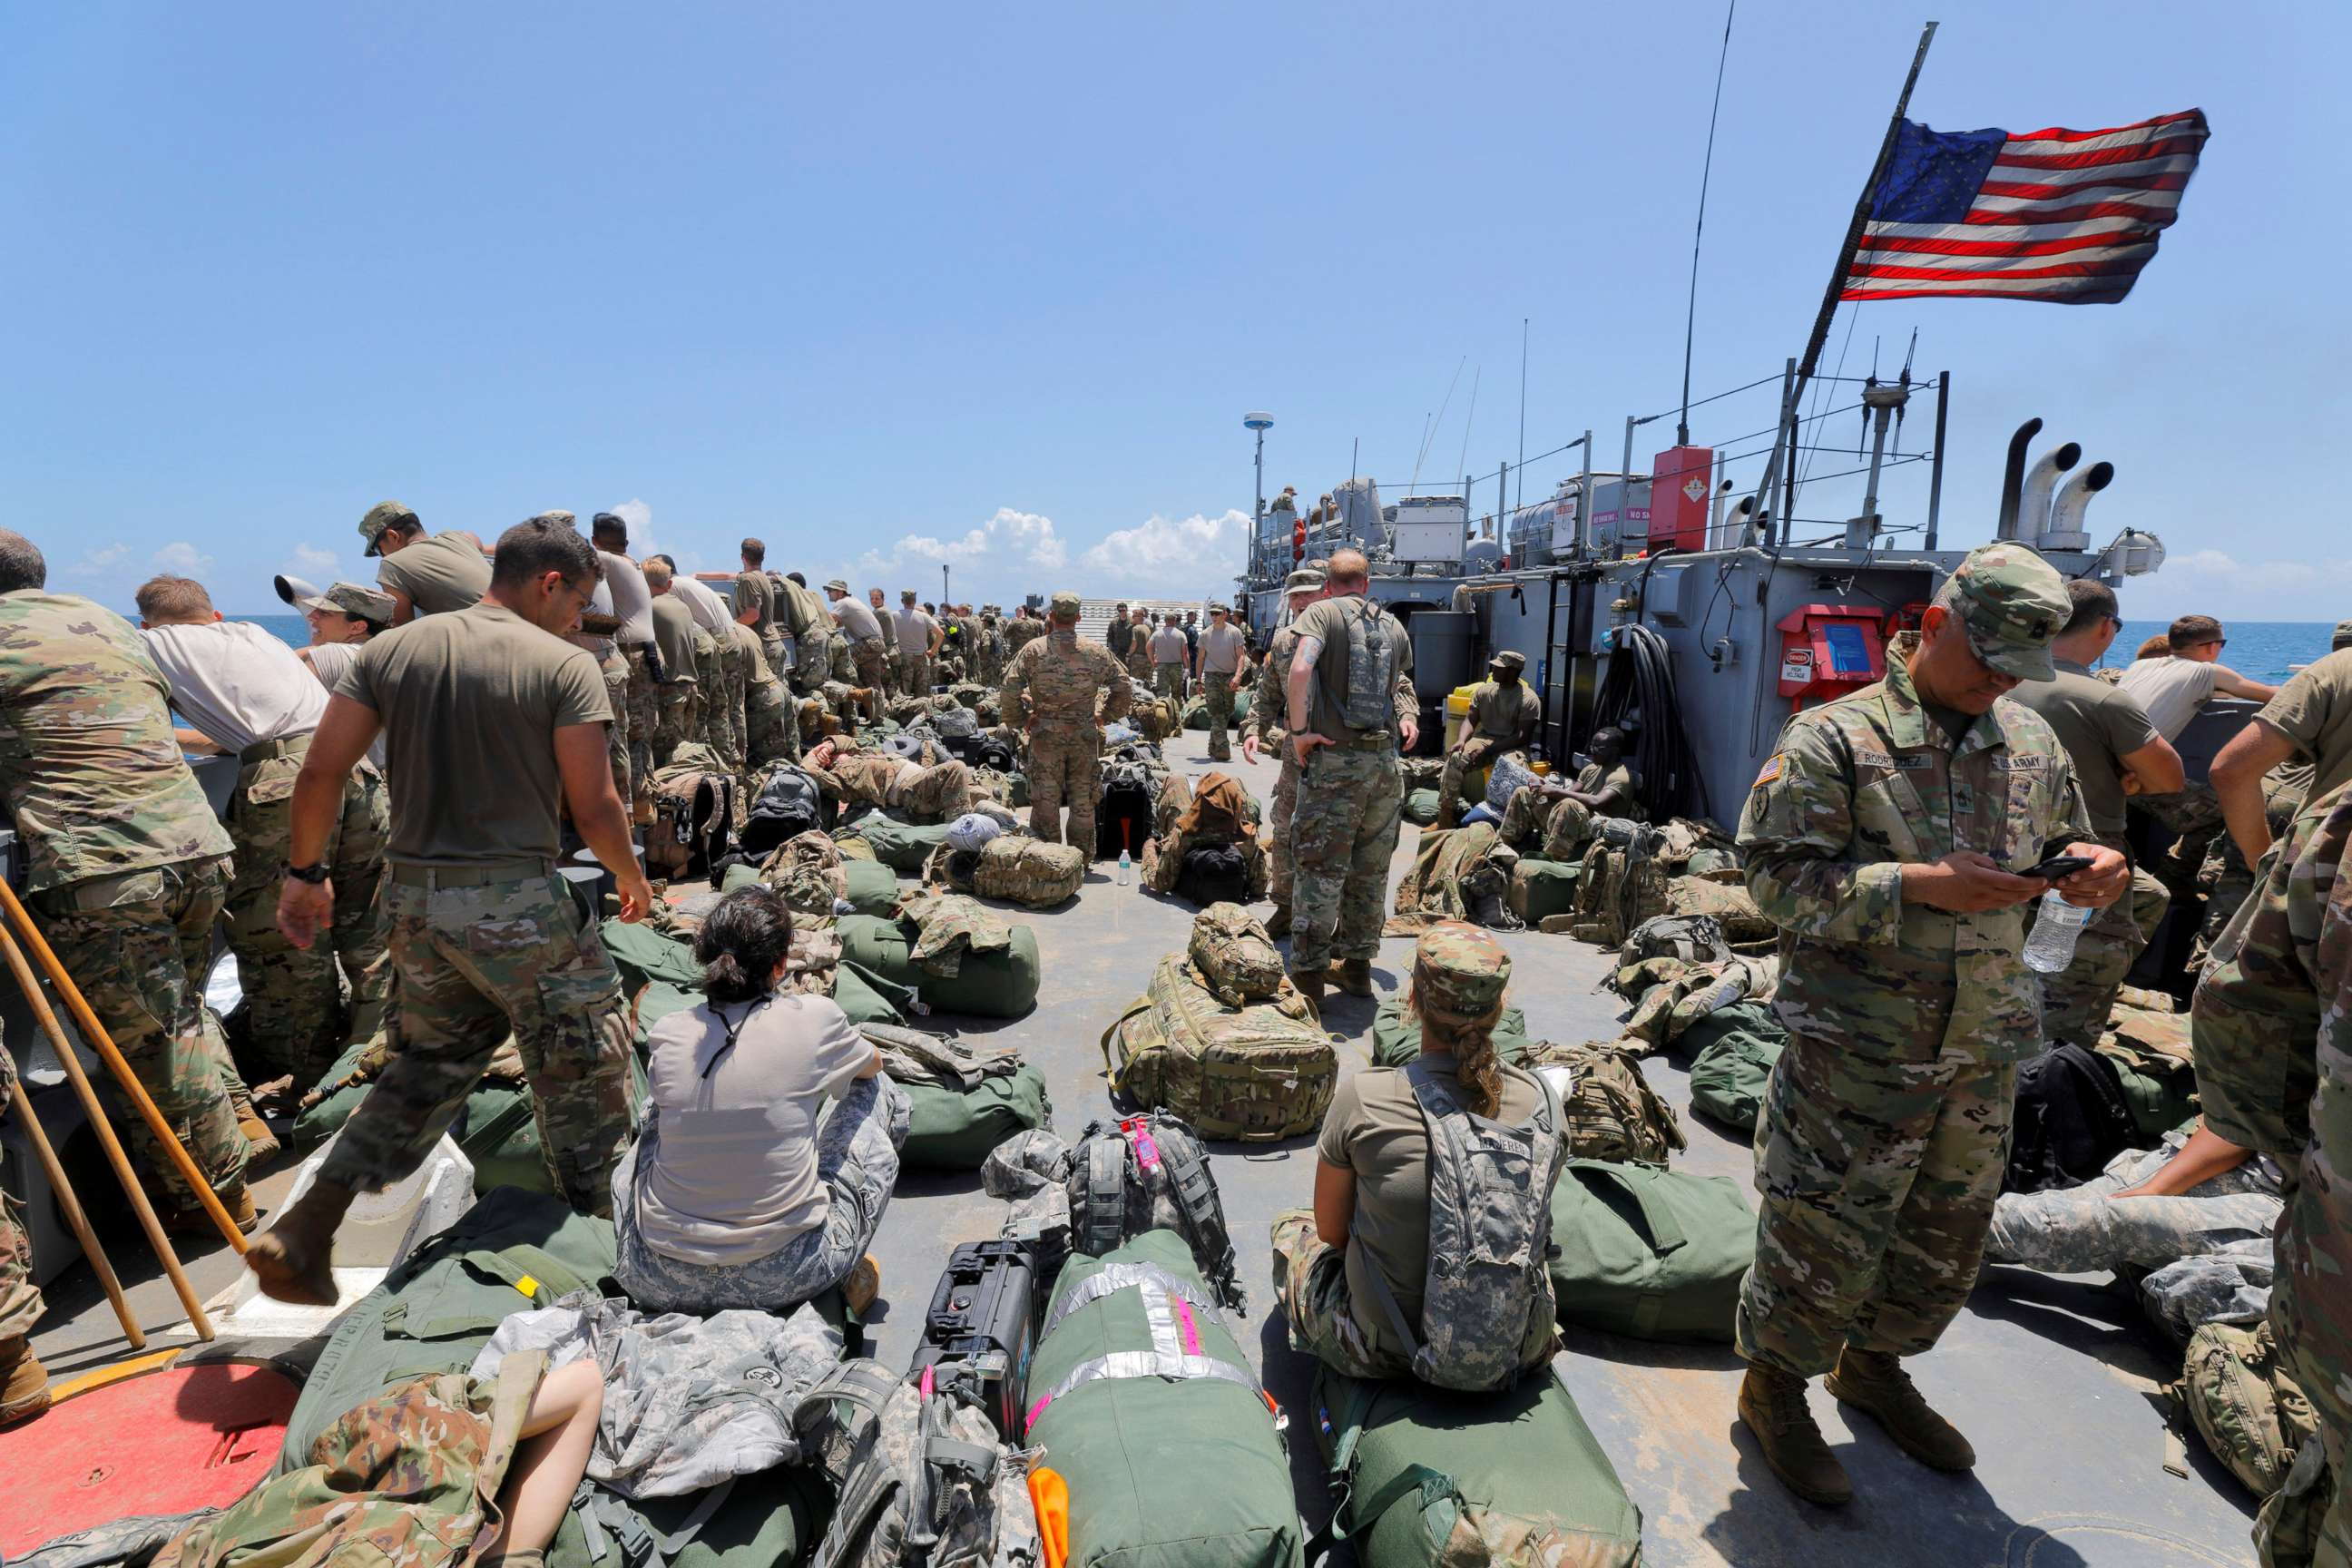 PHOTO: The deck of a U.S. Navy landing craft is crowded with Army soldiers and their belongings as they are evacuated in advance of Hurricane Maria, off St. Thomas shore, U.S. Virgin Islands, Sept. 17, 2017.